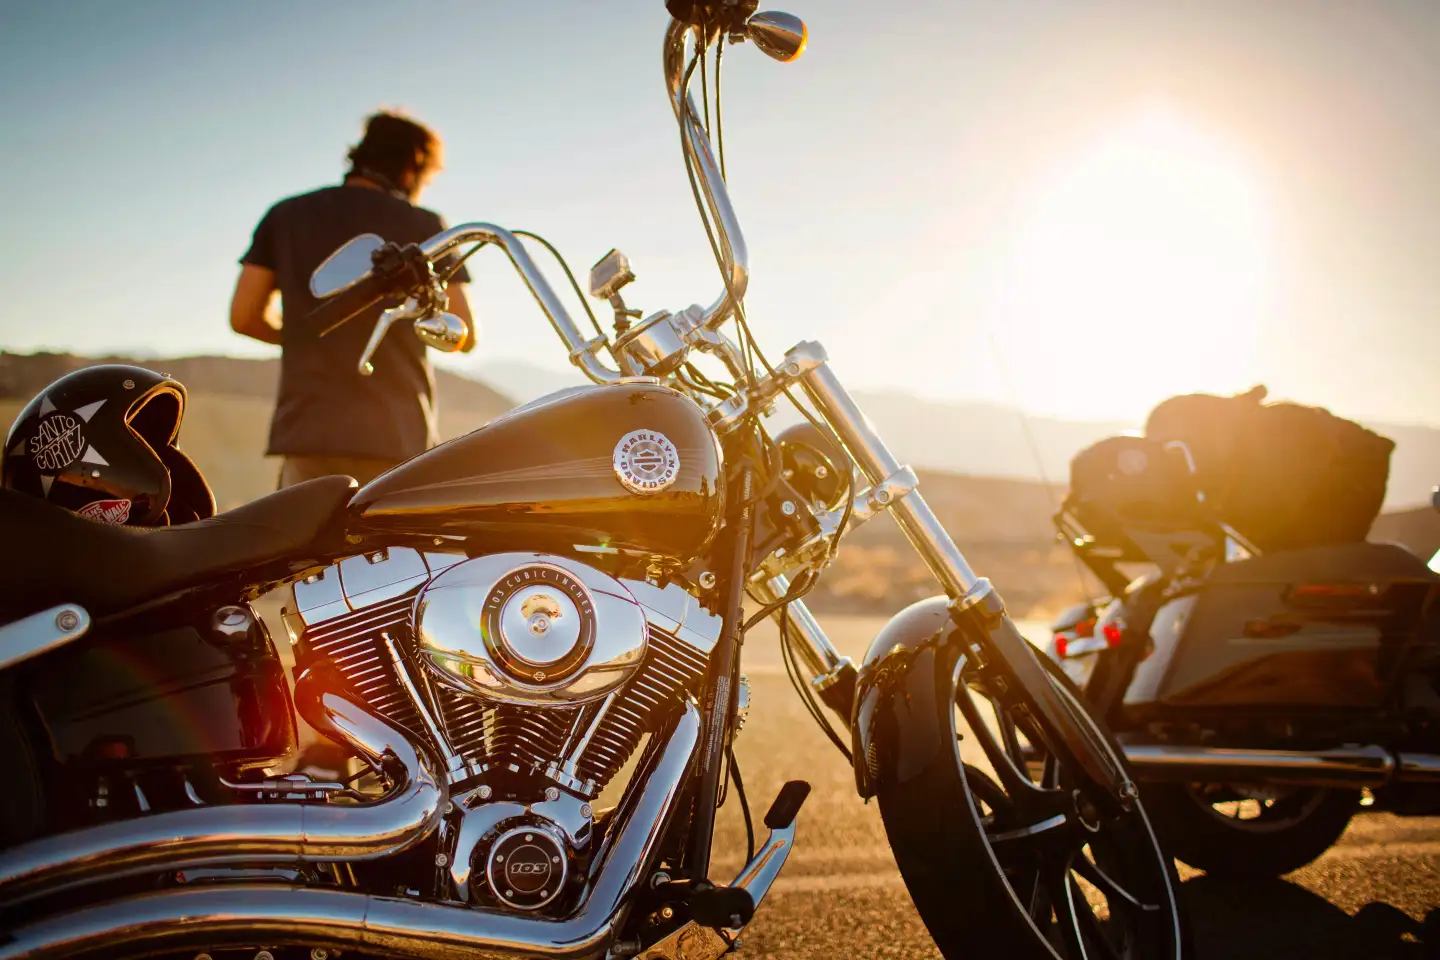 Any questions about how to rent out your motorcycle? We have answers!